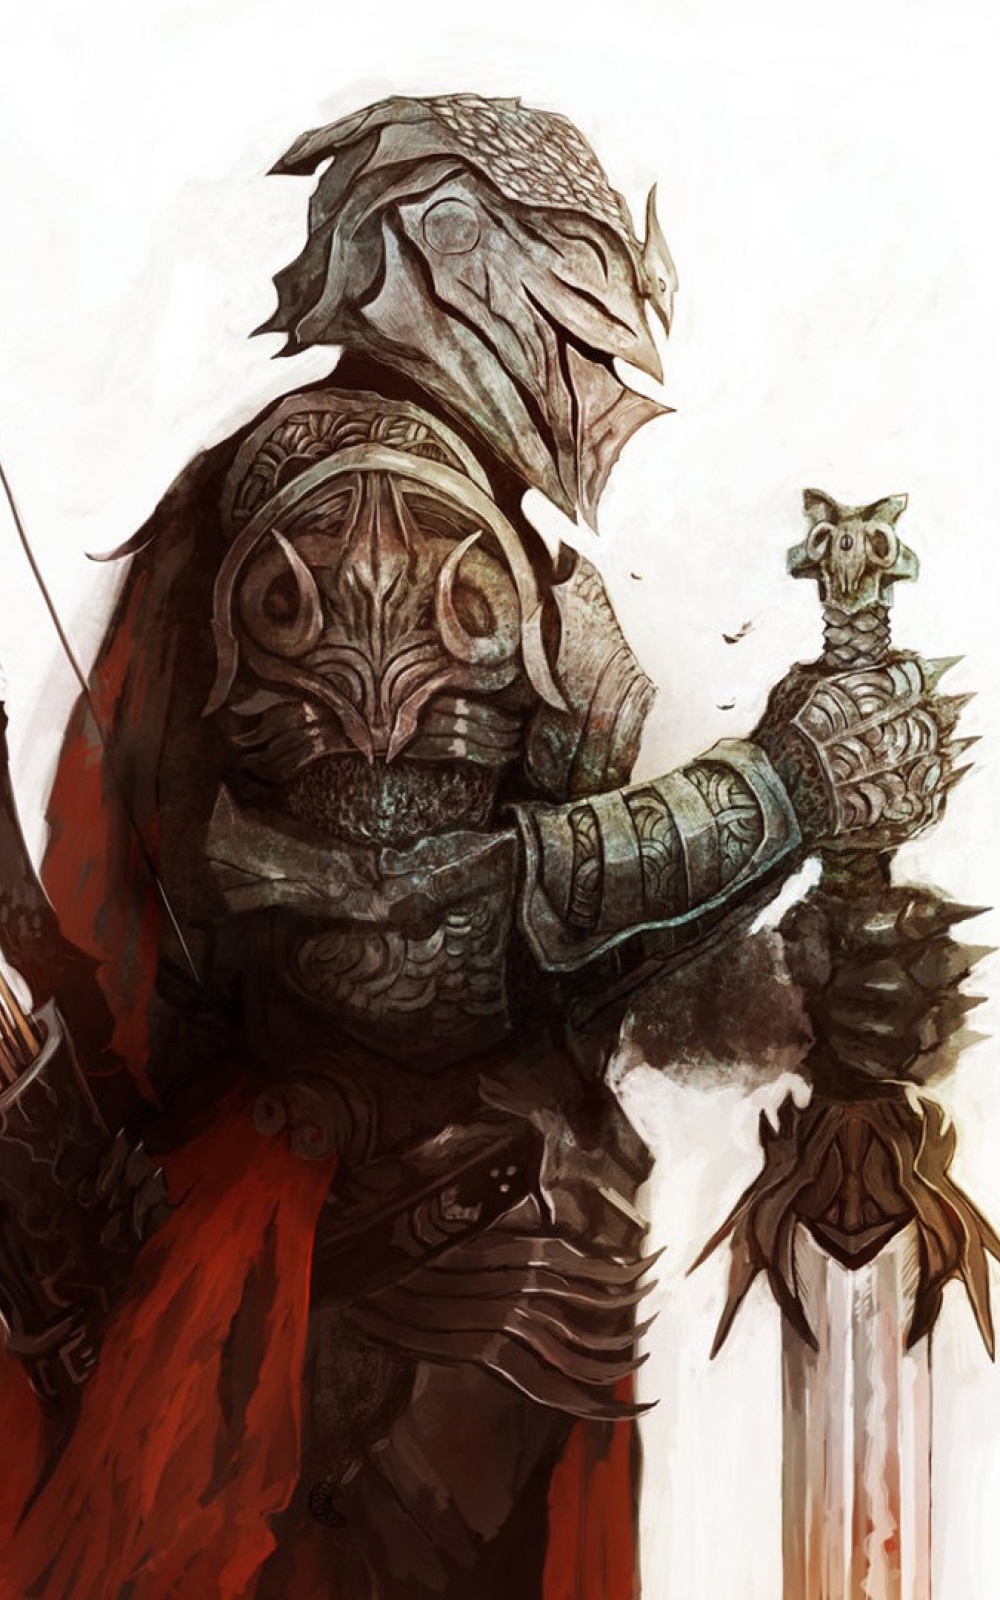 Medieval Armor Knight Sword Android Wallpaper free download